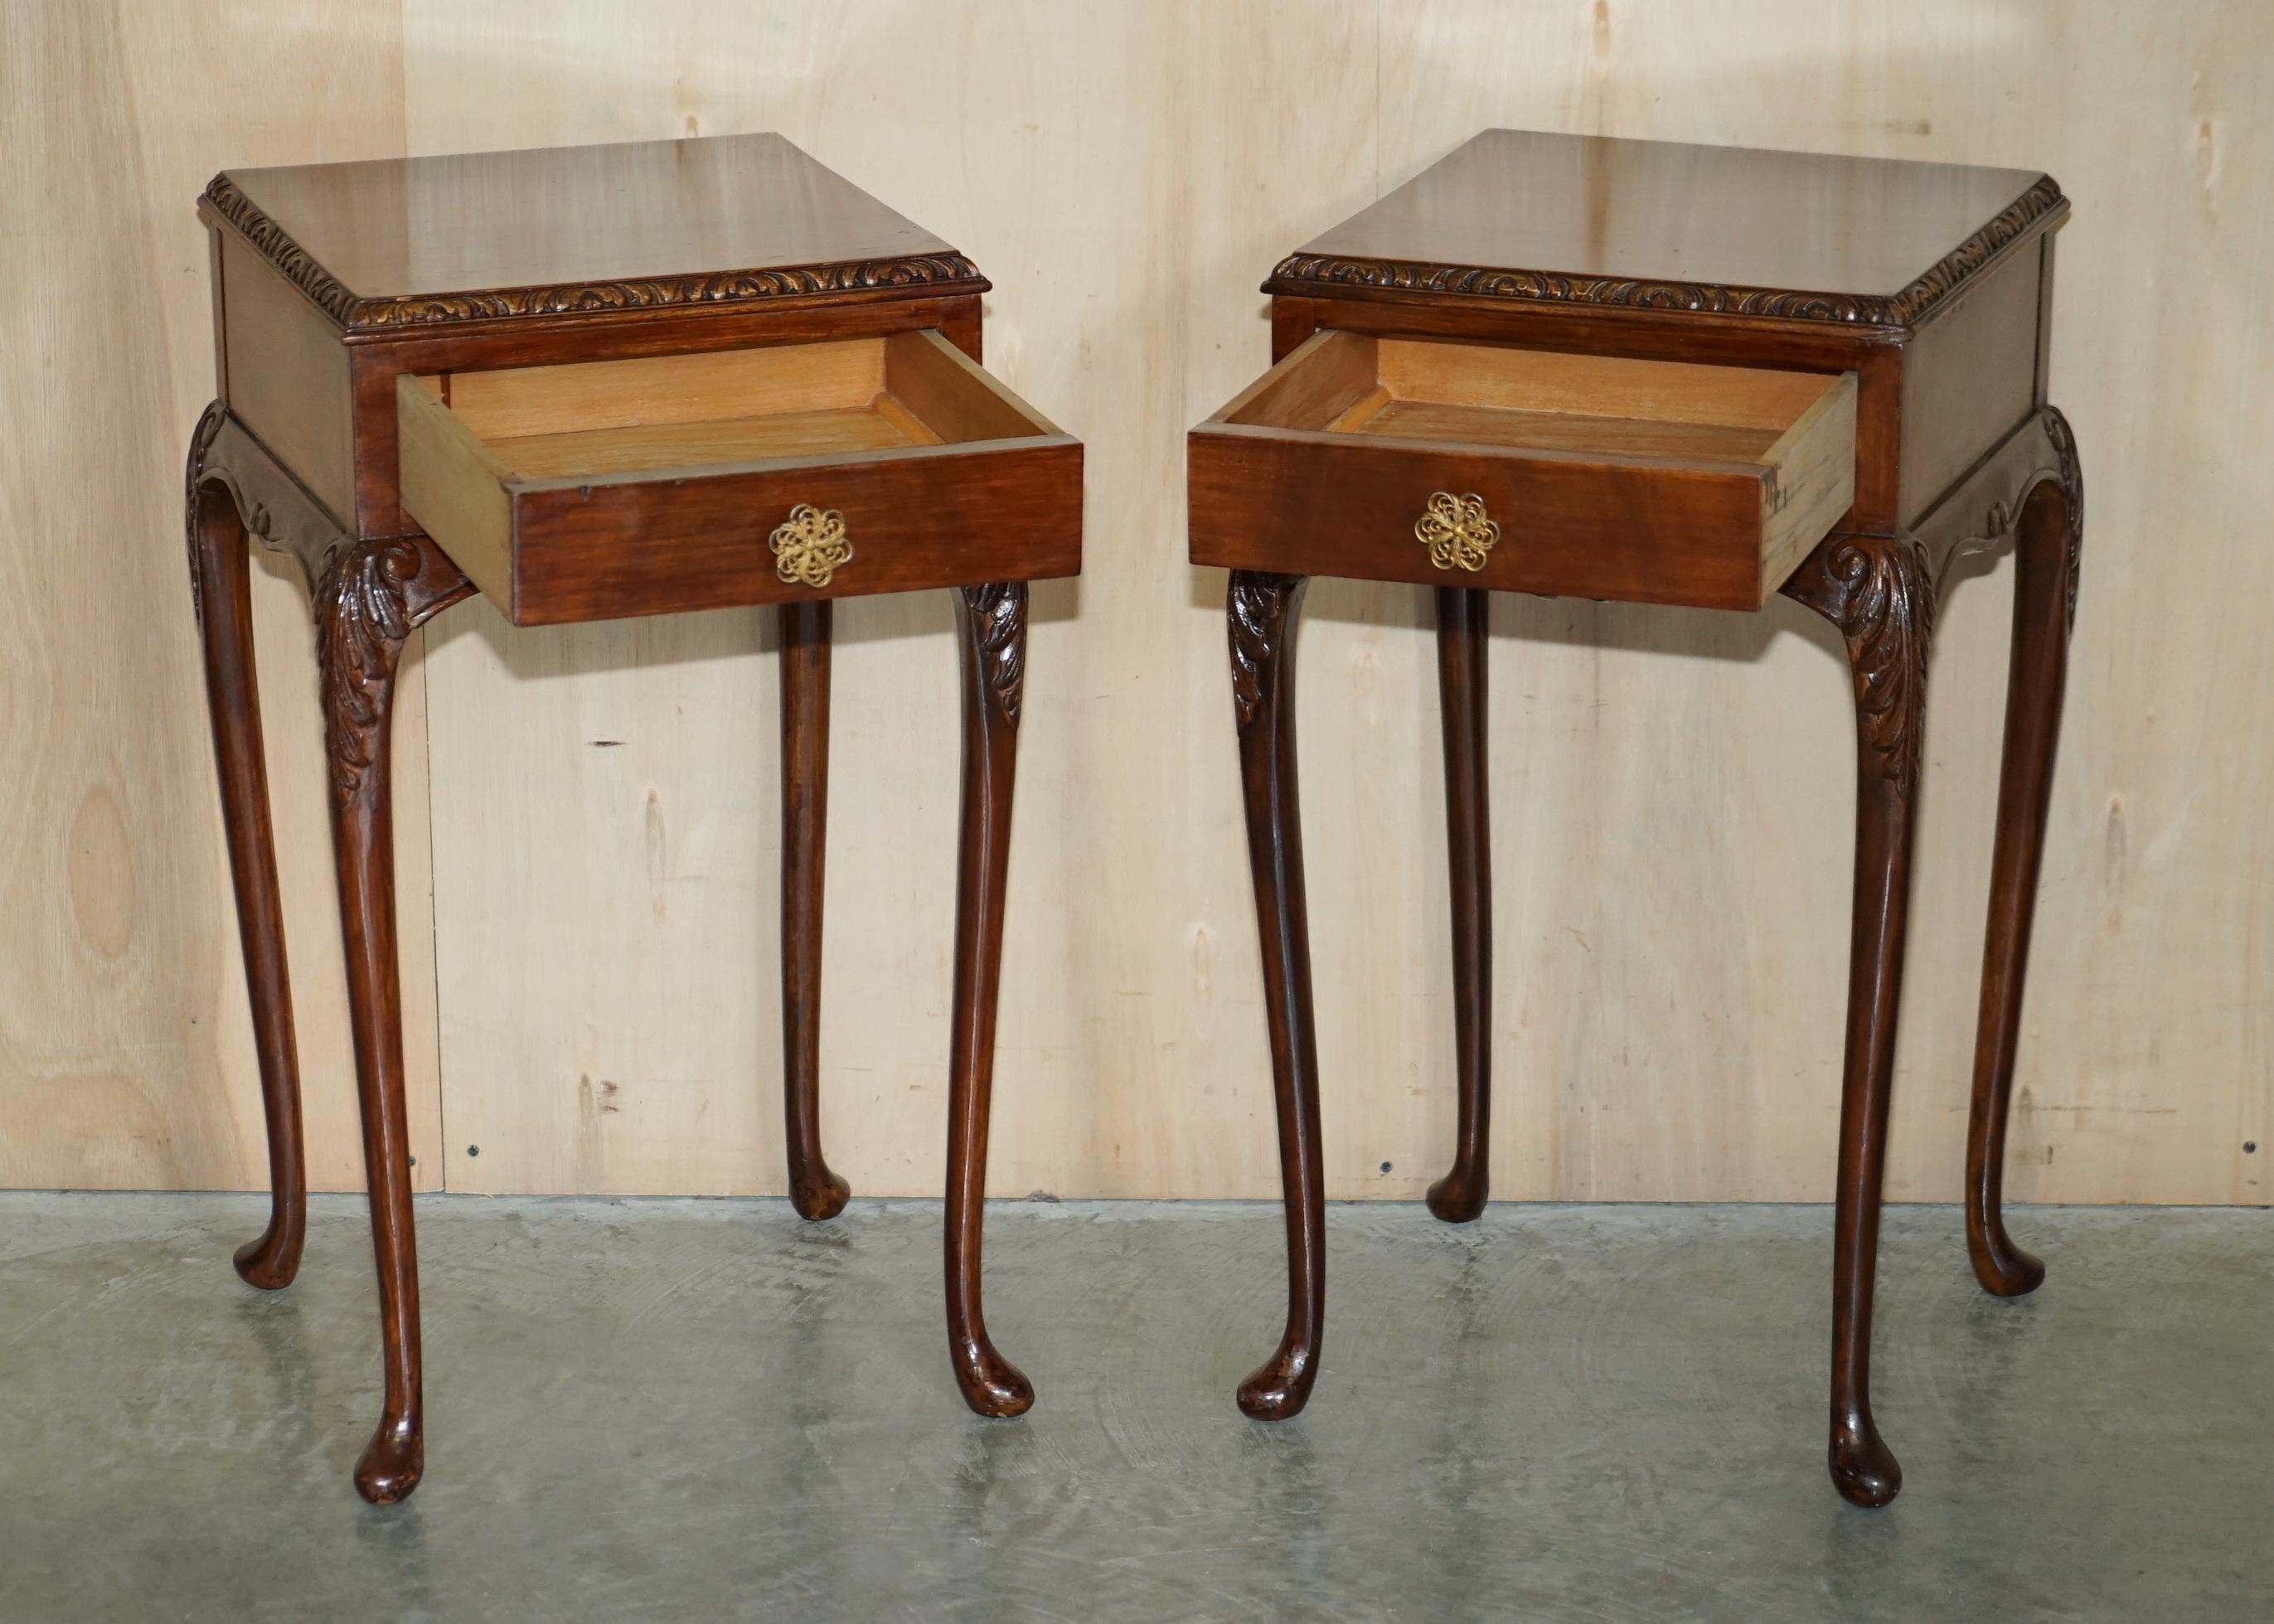 PAIR OF ANTIQUE VICTORIAN ELEGANT CABRIOLE LEGGED SINGLE DRAWER TALL SiDE TABLES For Sale 8